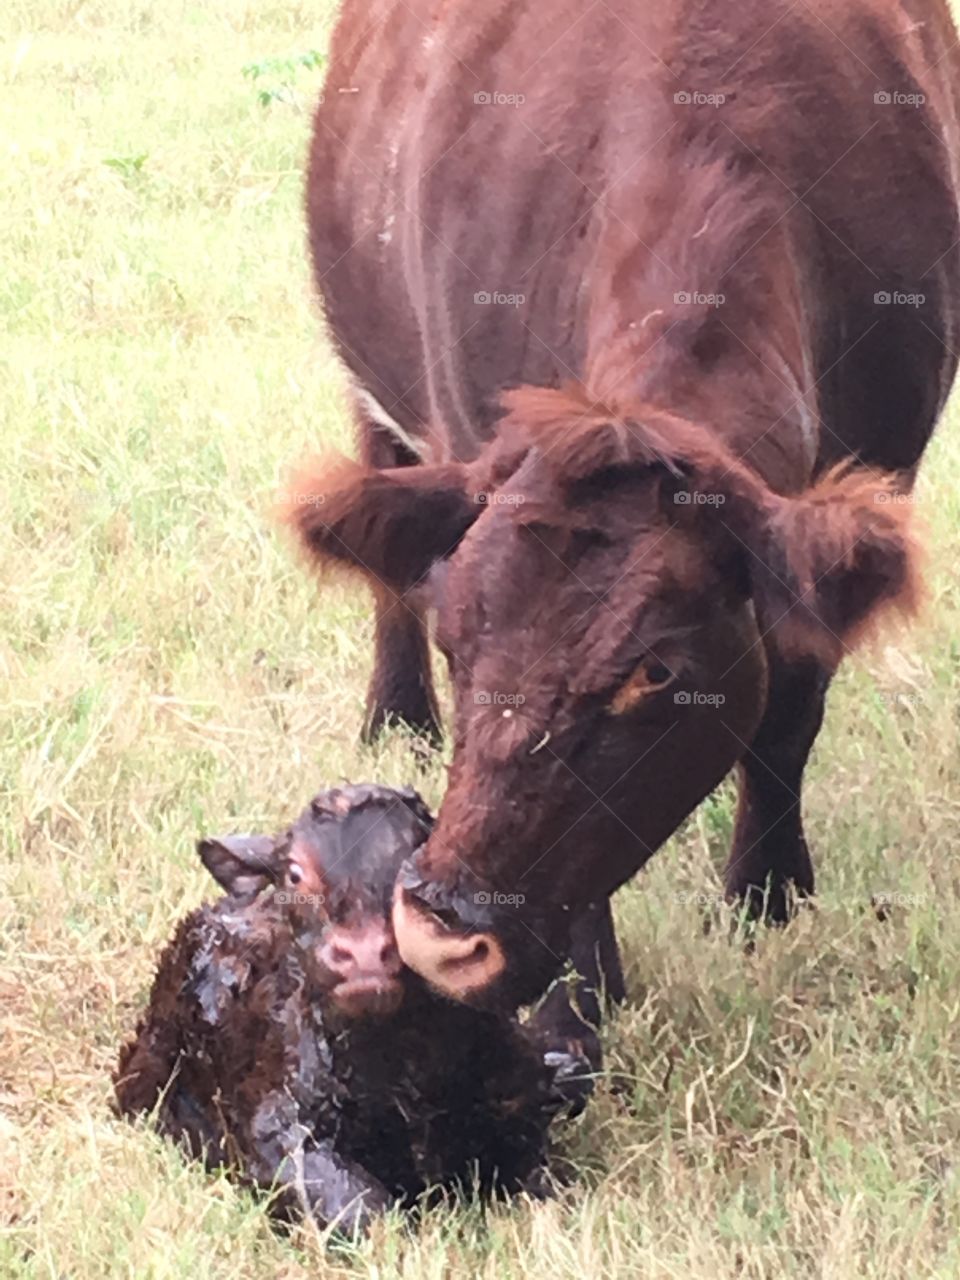 Just born and getting cleaned up by momma cow. 